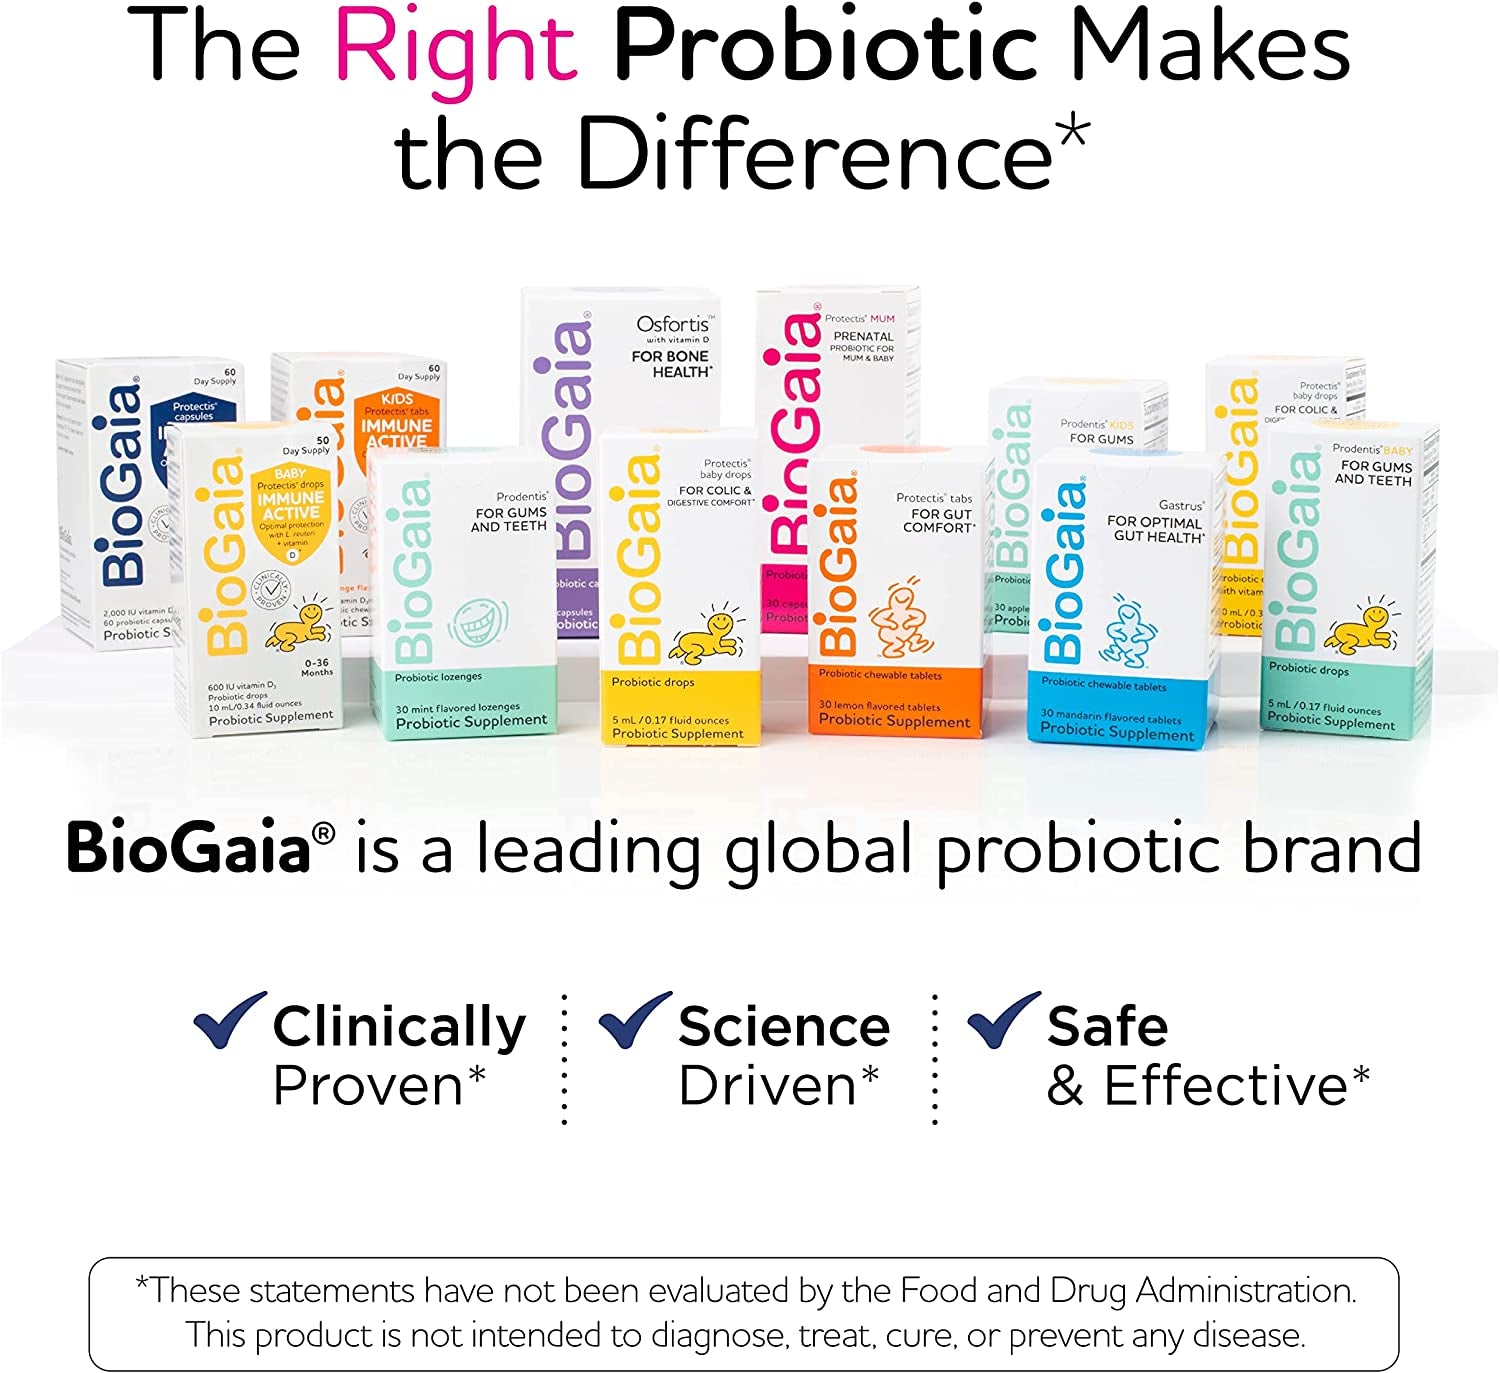 Biogaia Protectis Baby Probiotic Drops + Vitamin D | Reduces Colic, Gas & Spit-Ups | Healthy Poops | Reduces Crying & Fussing & Promotes Digestive Comfort | Newborns, Babies & Infants | 0.34 Oz - Free & Fast Delivery